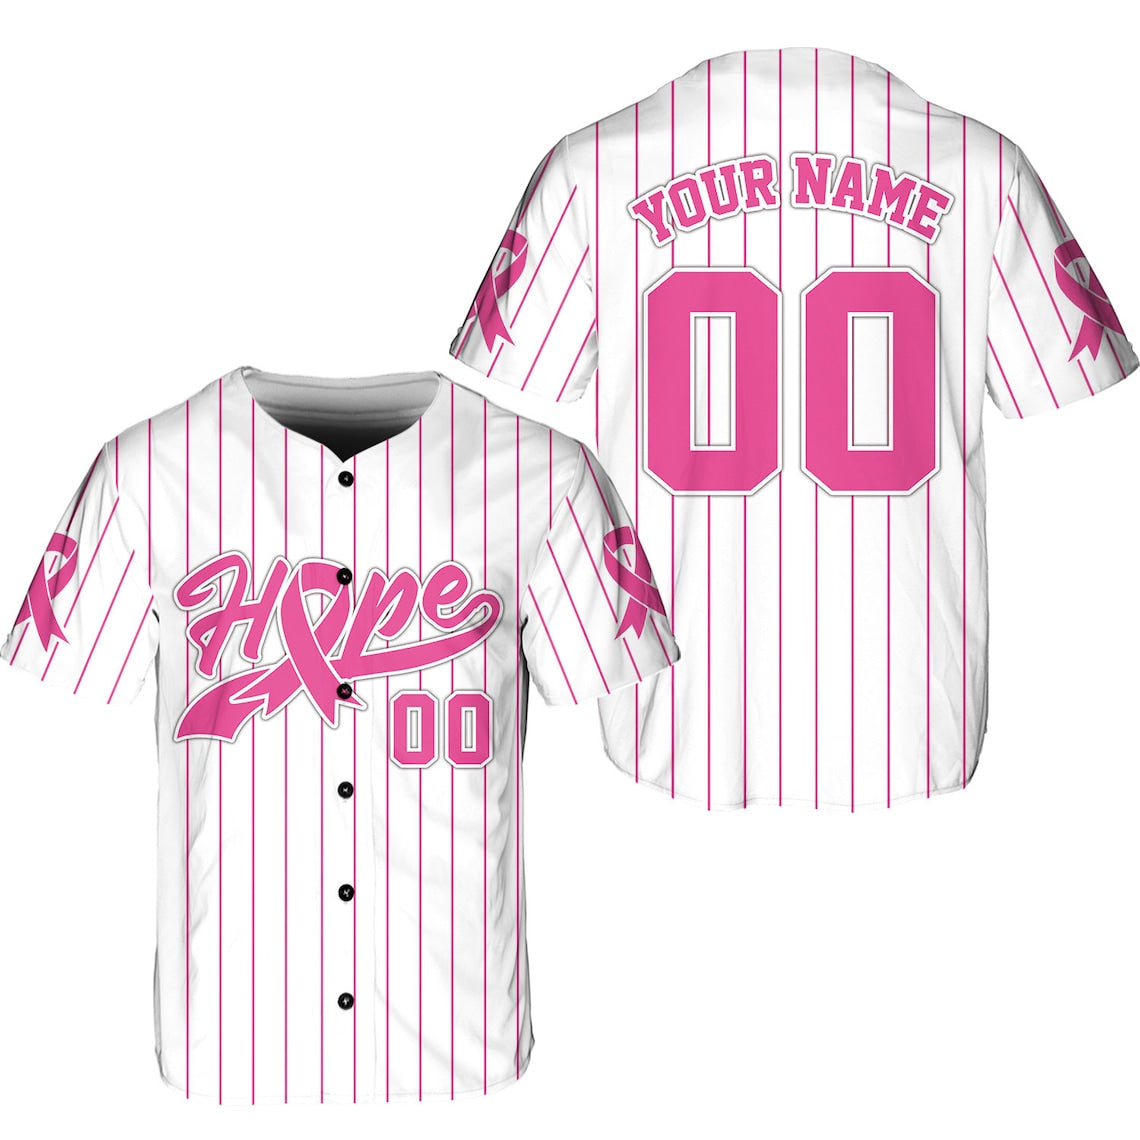 Personalized Name Breast Cancer Baseball Jersey/ Gift For Breast Cancer Month/ Pink Ribbon Jersey Breast Cancer Support Gift For Family